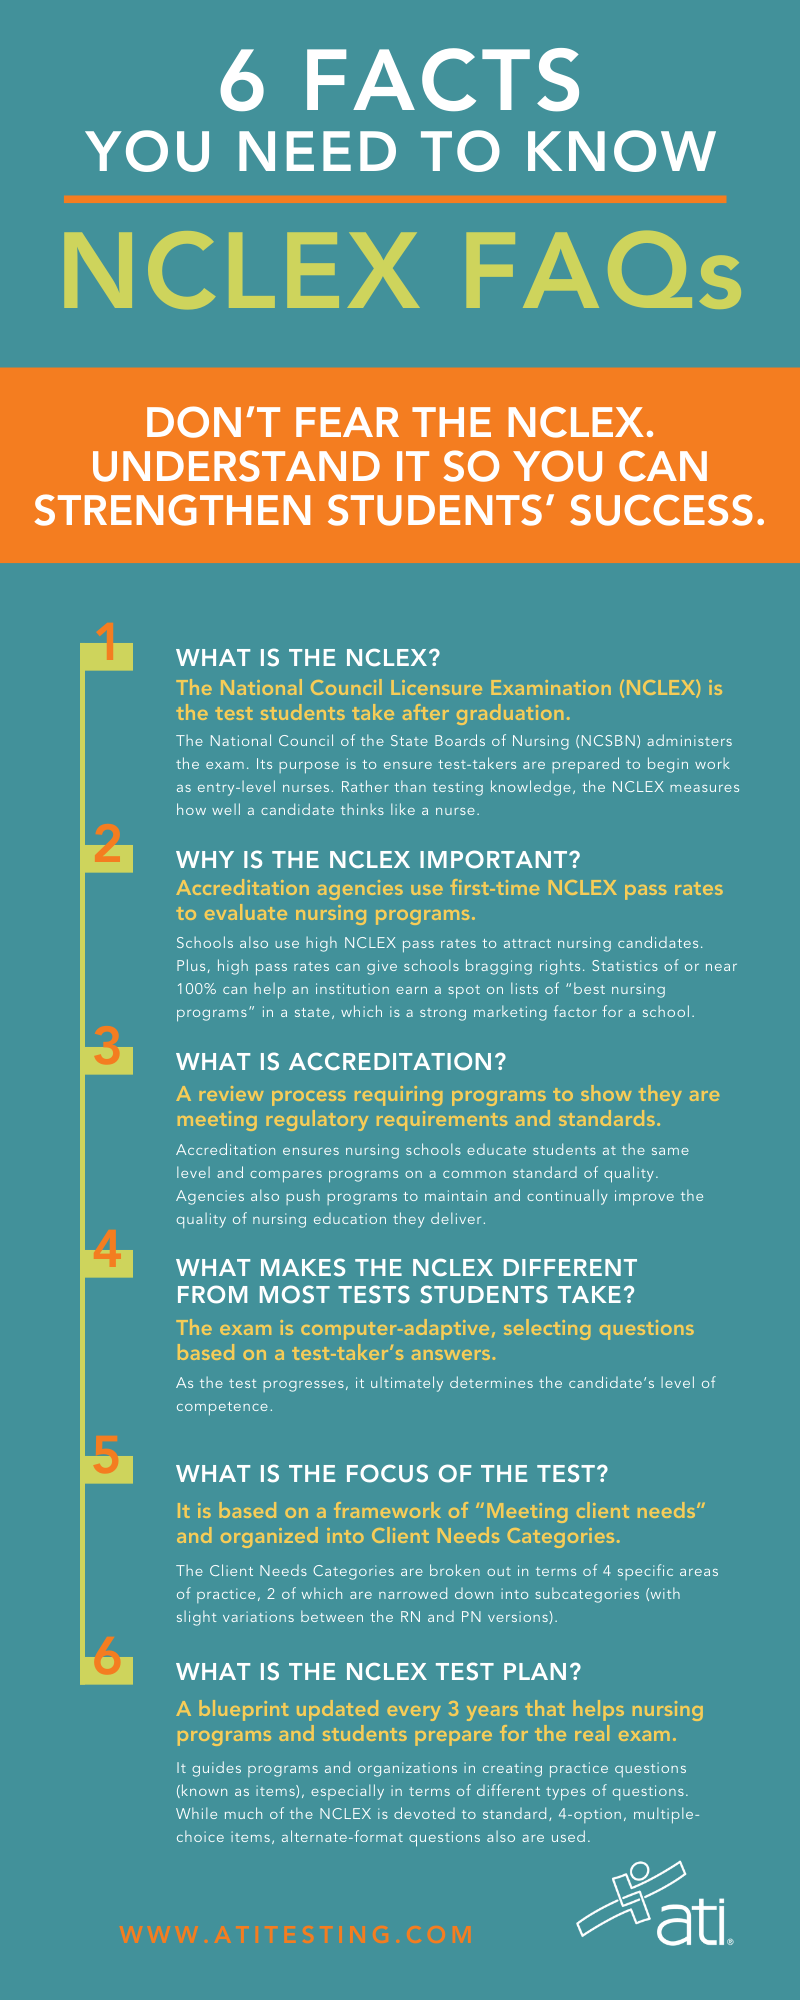 FAQS ABOUT THE NCLEX: THE MOST IMPORTANT TEST IN NURSING